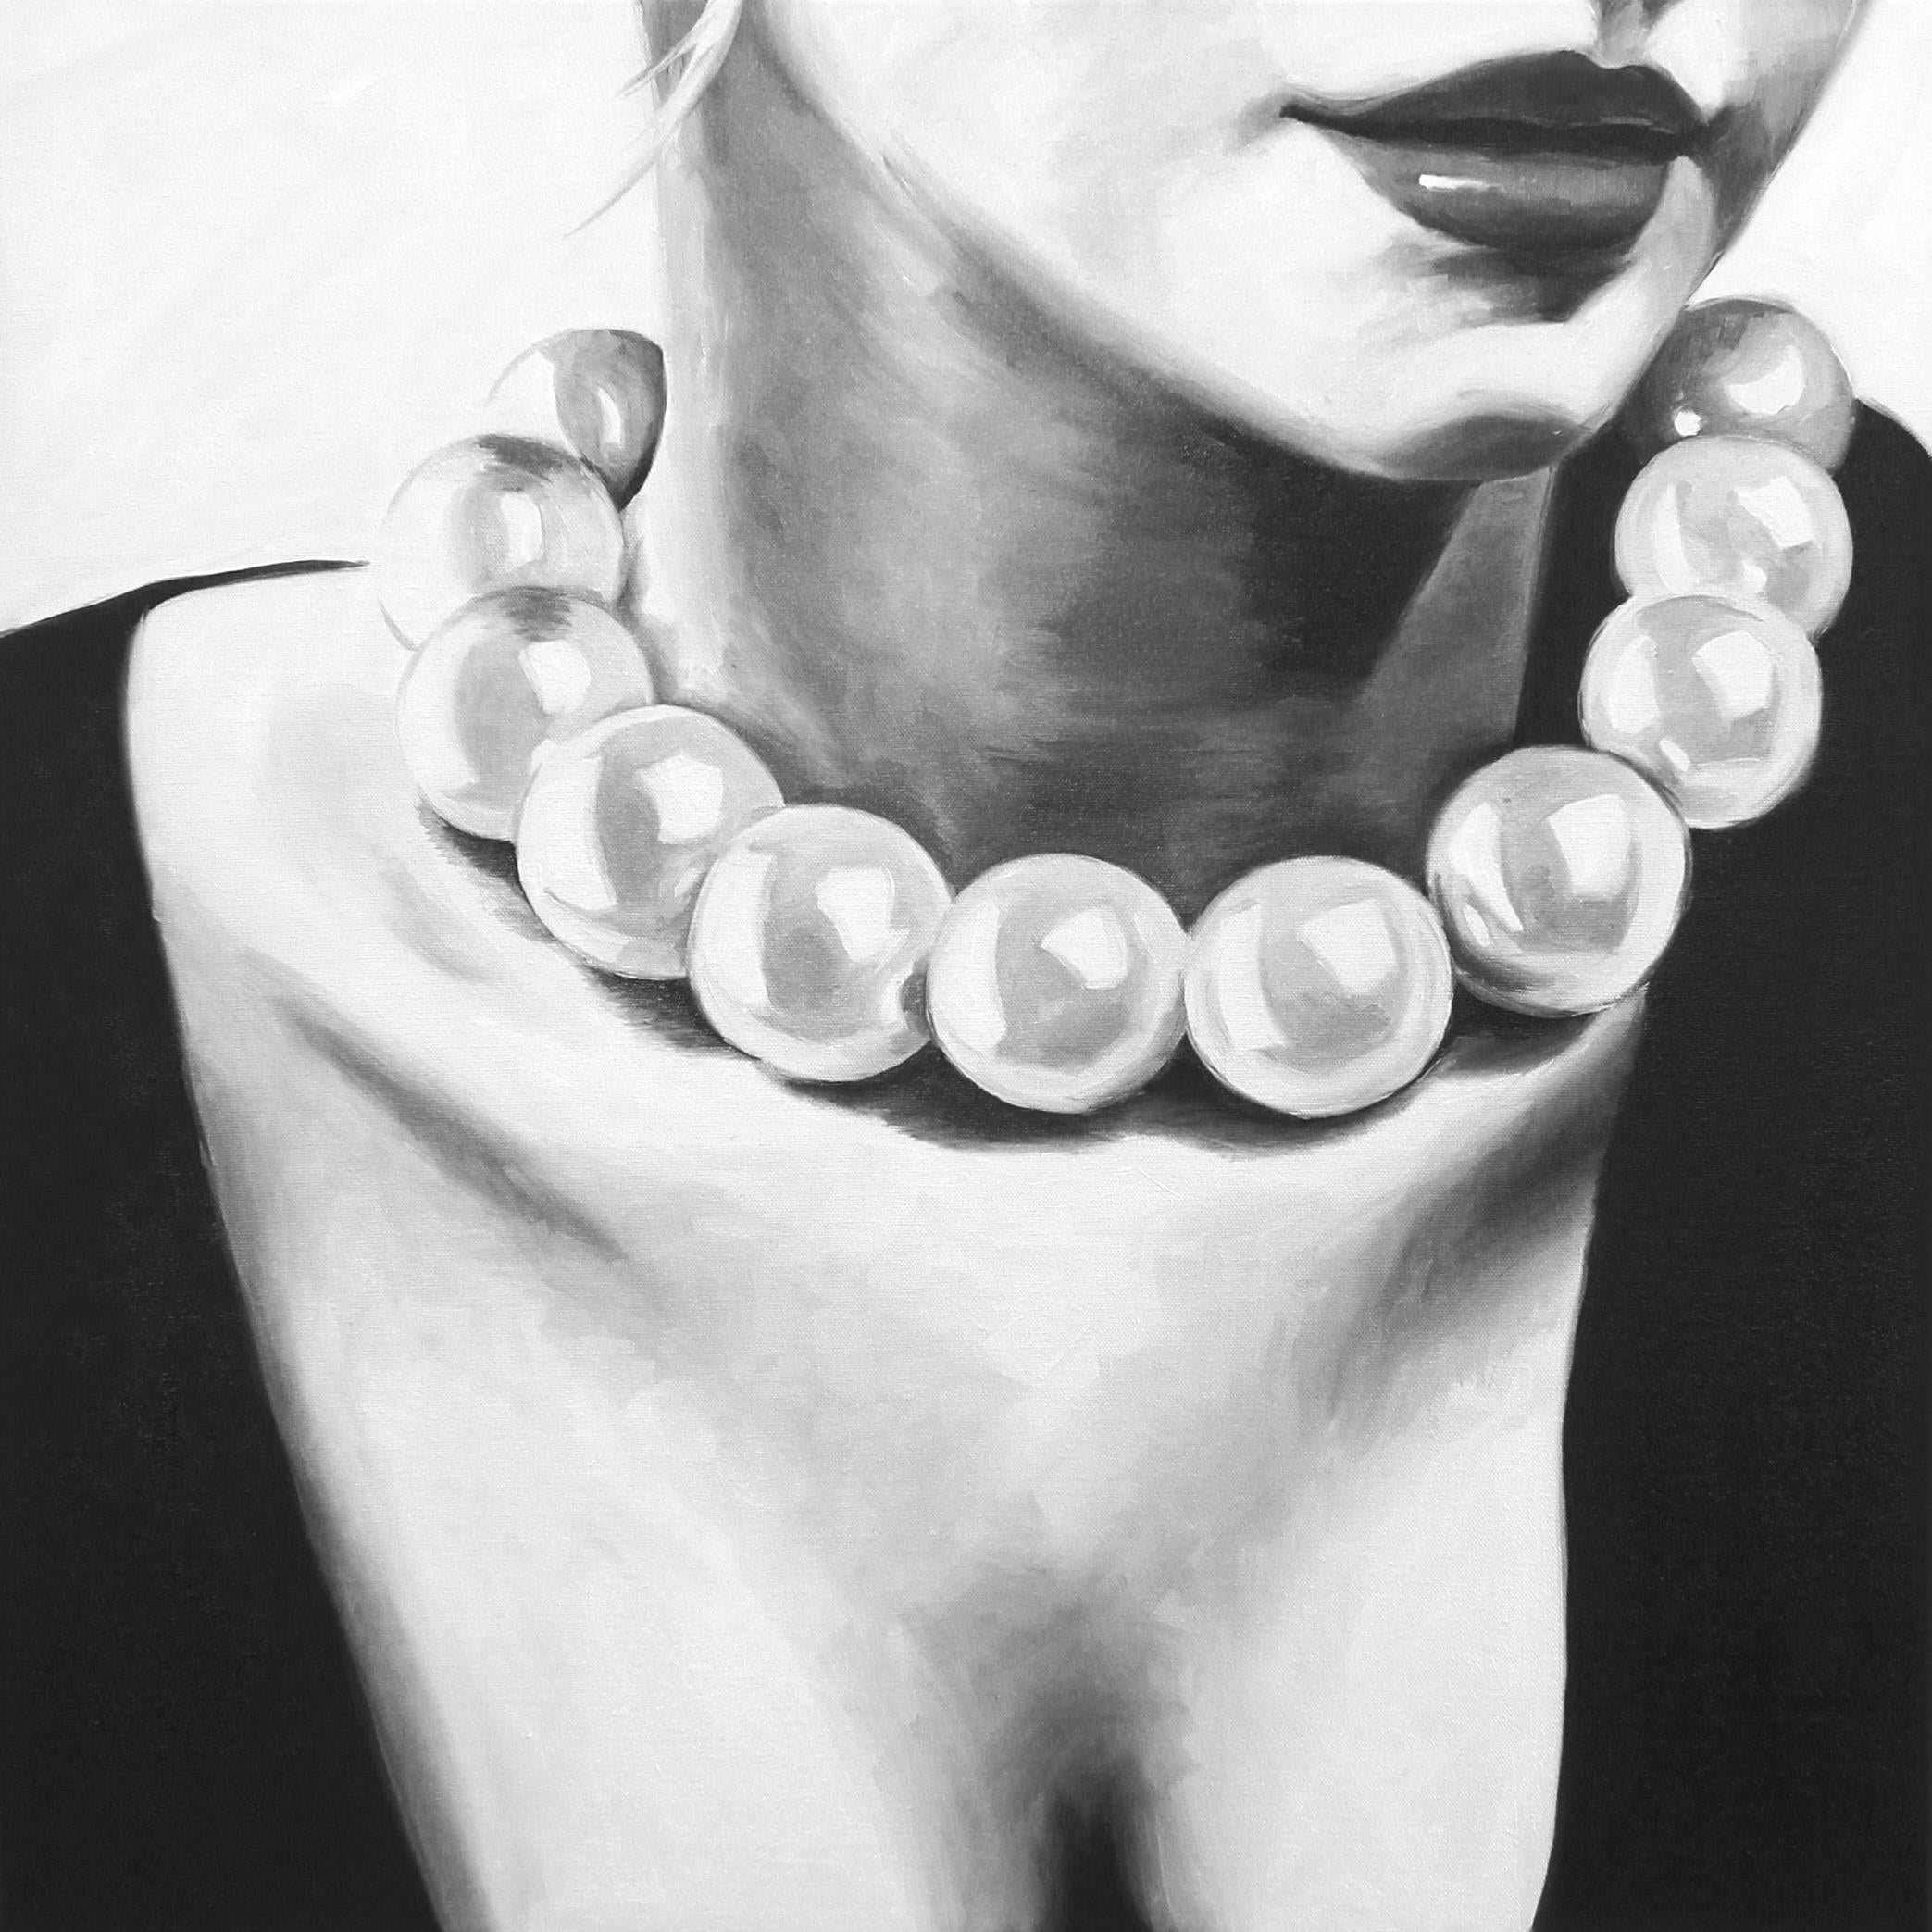 Cindy Press Portrait Painting - "Looking for Money" cropped black and white oil painting of a woman in pearls